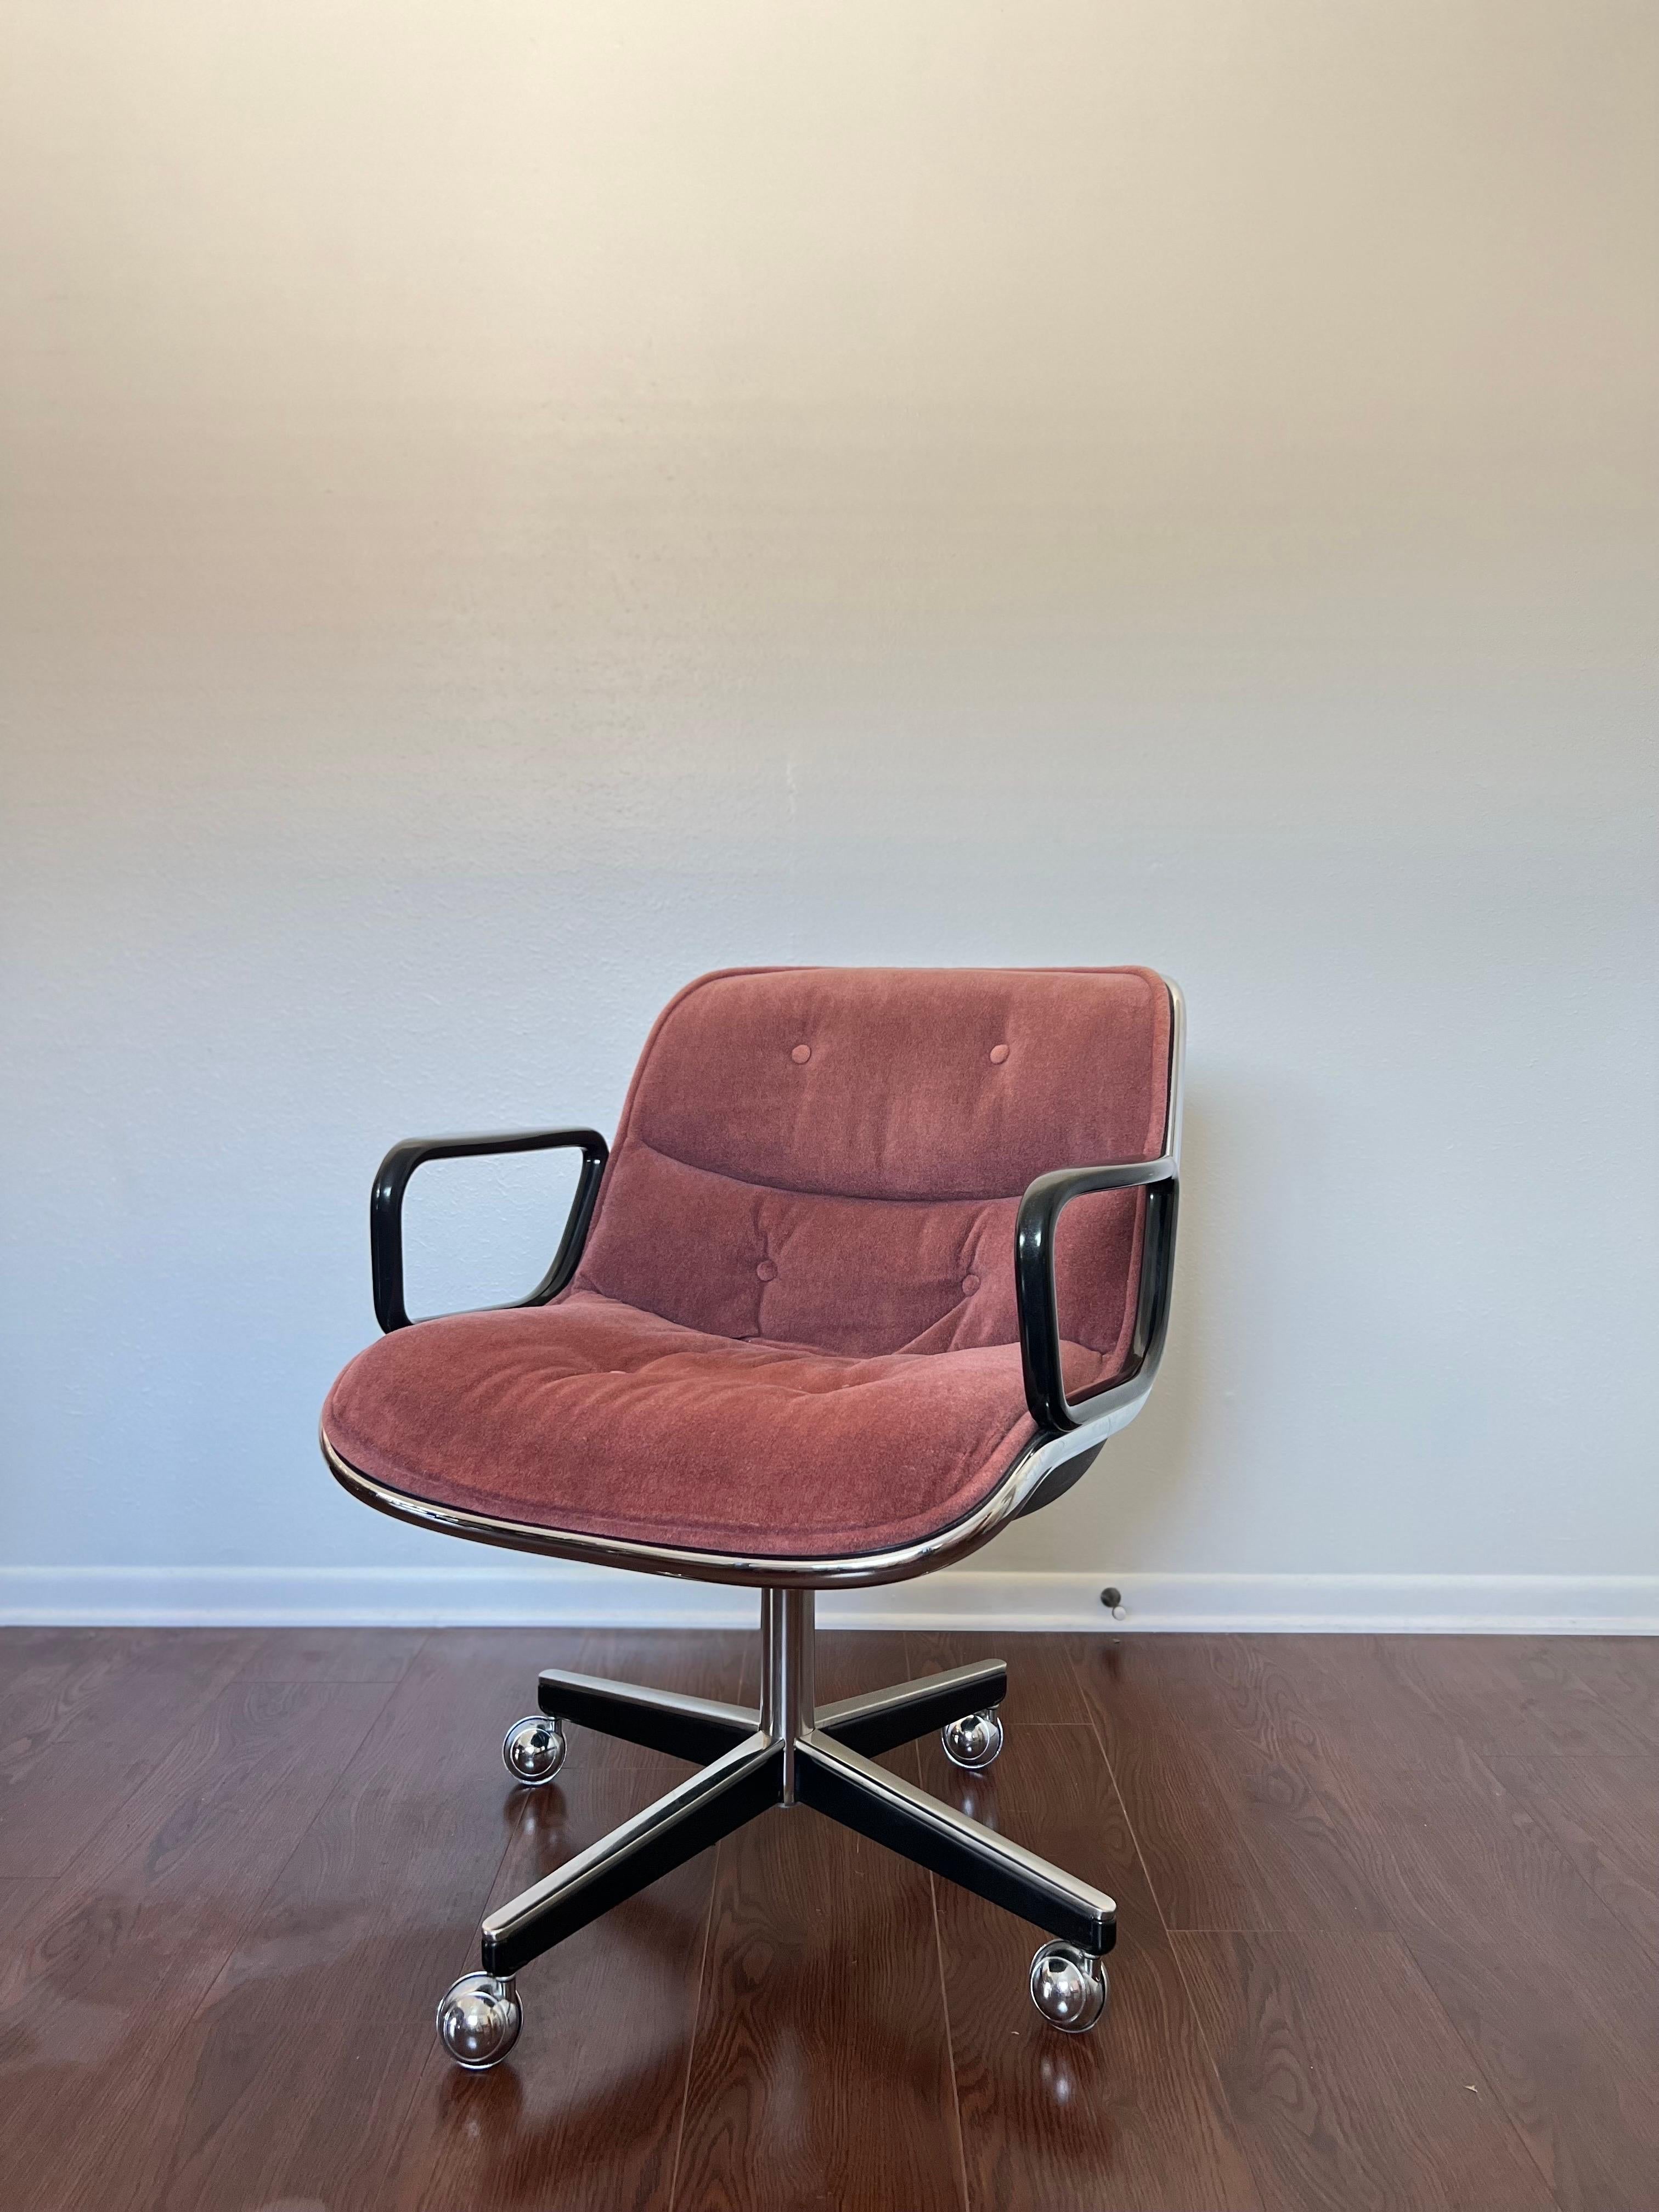 Classic executive chair designed by Charles Pollock for Knoll in 1962, original tags still on the bottom. The upholstery is a pastel pink color, and is in good condition. There are some scratches on the back of the chair as seen in photos. Overall